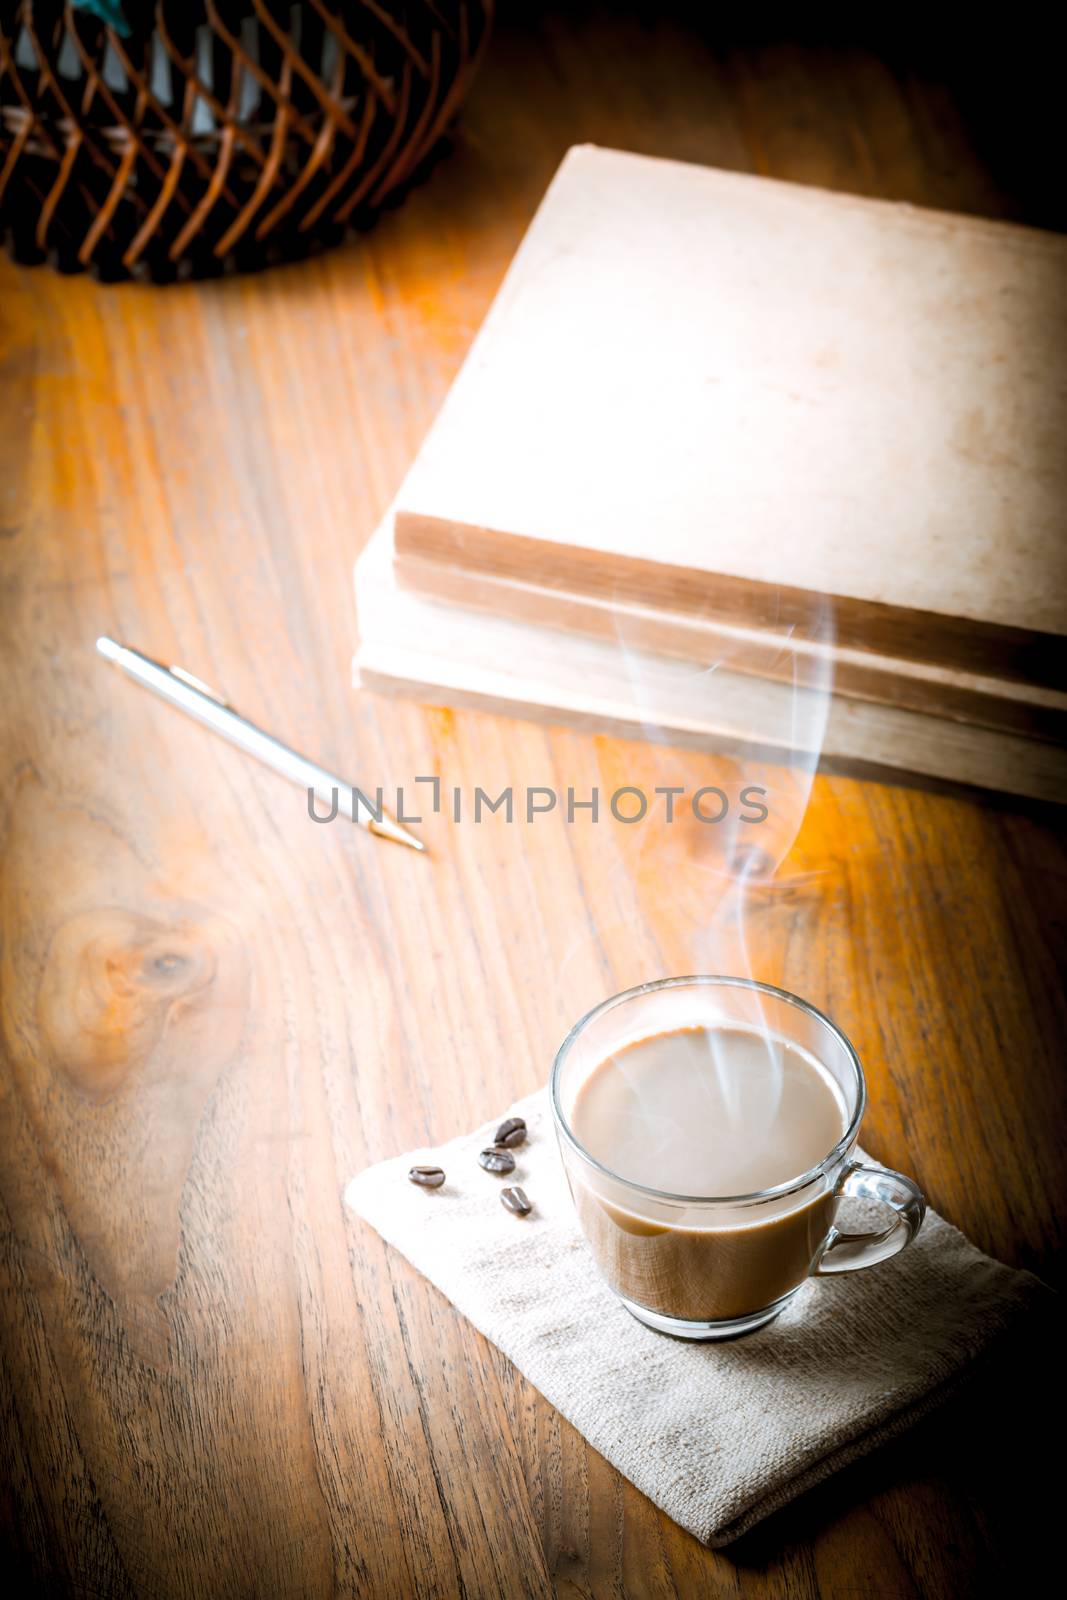 Coffee cup and coffee beans, vintage style